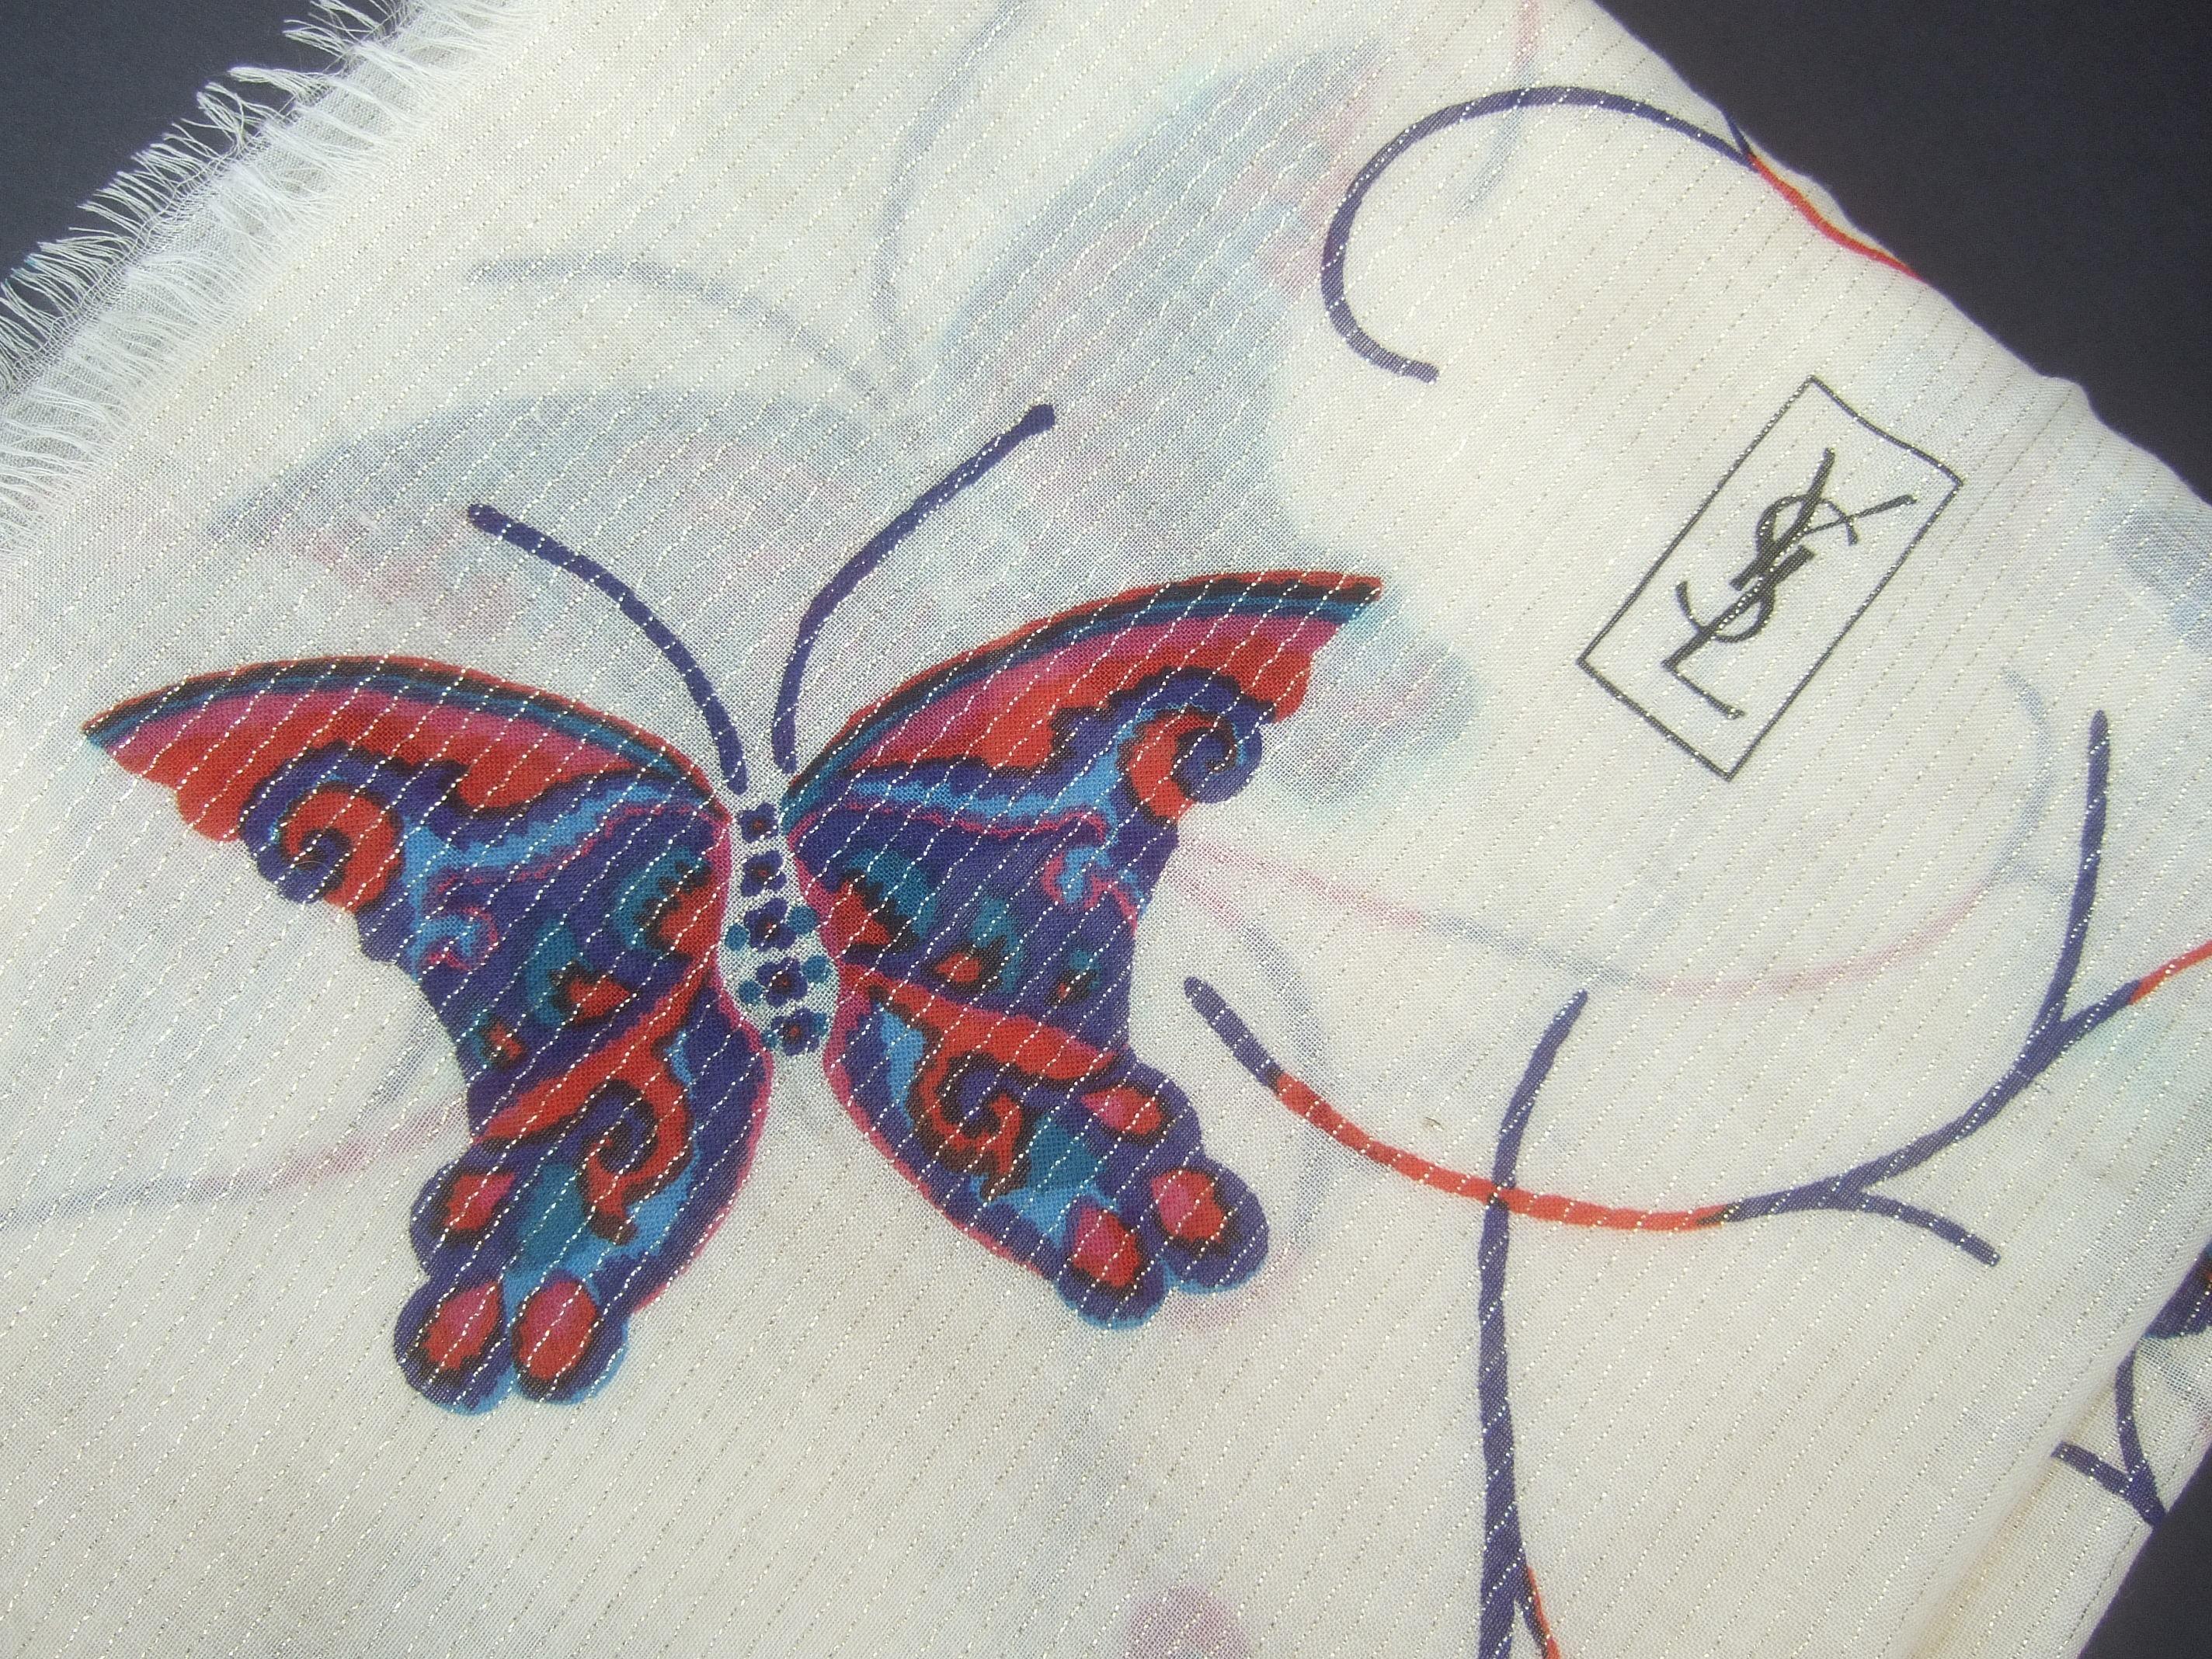 Yves Saint Laurent Large Butterfly Print Scarf - Shawl Wrap 52 x 53 Circa 1970s  3